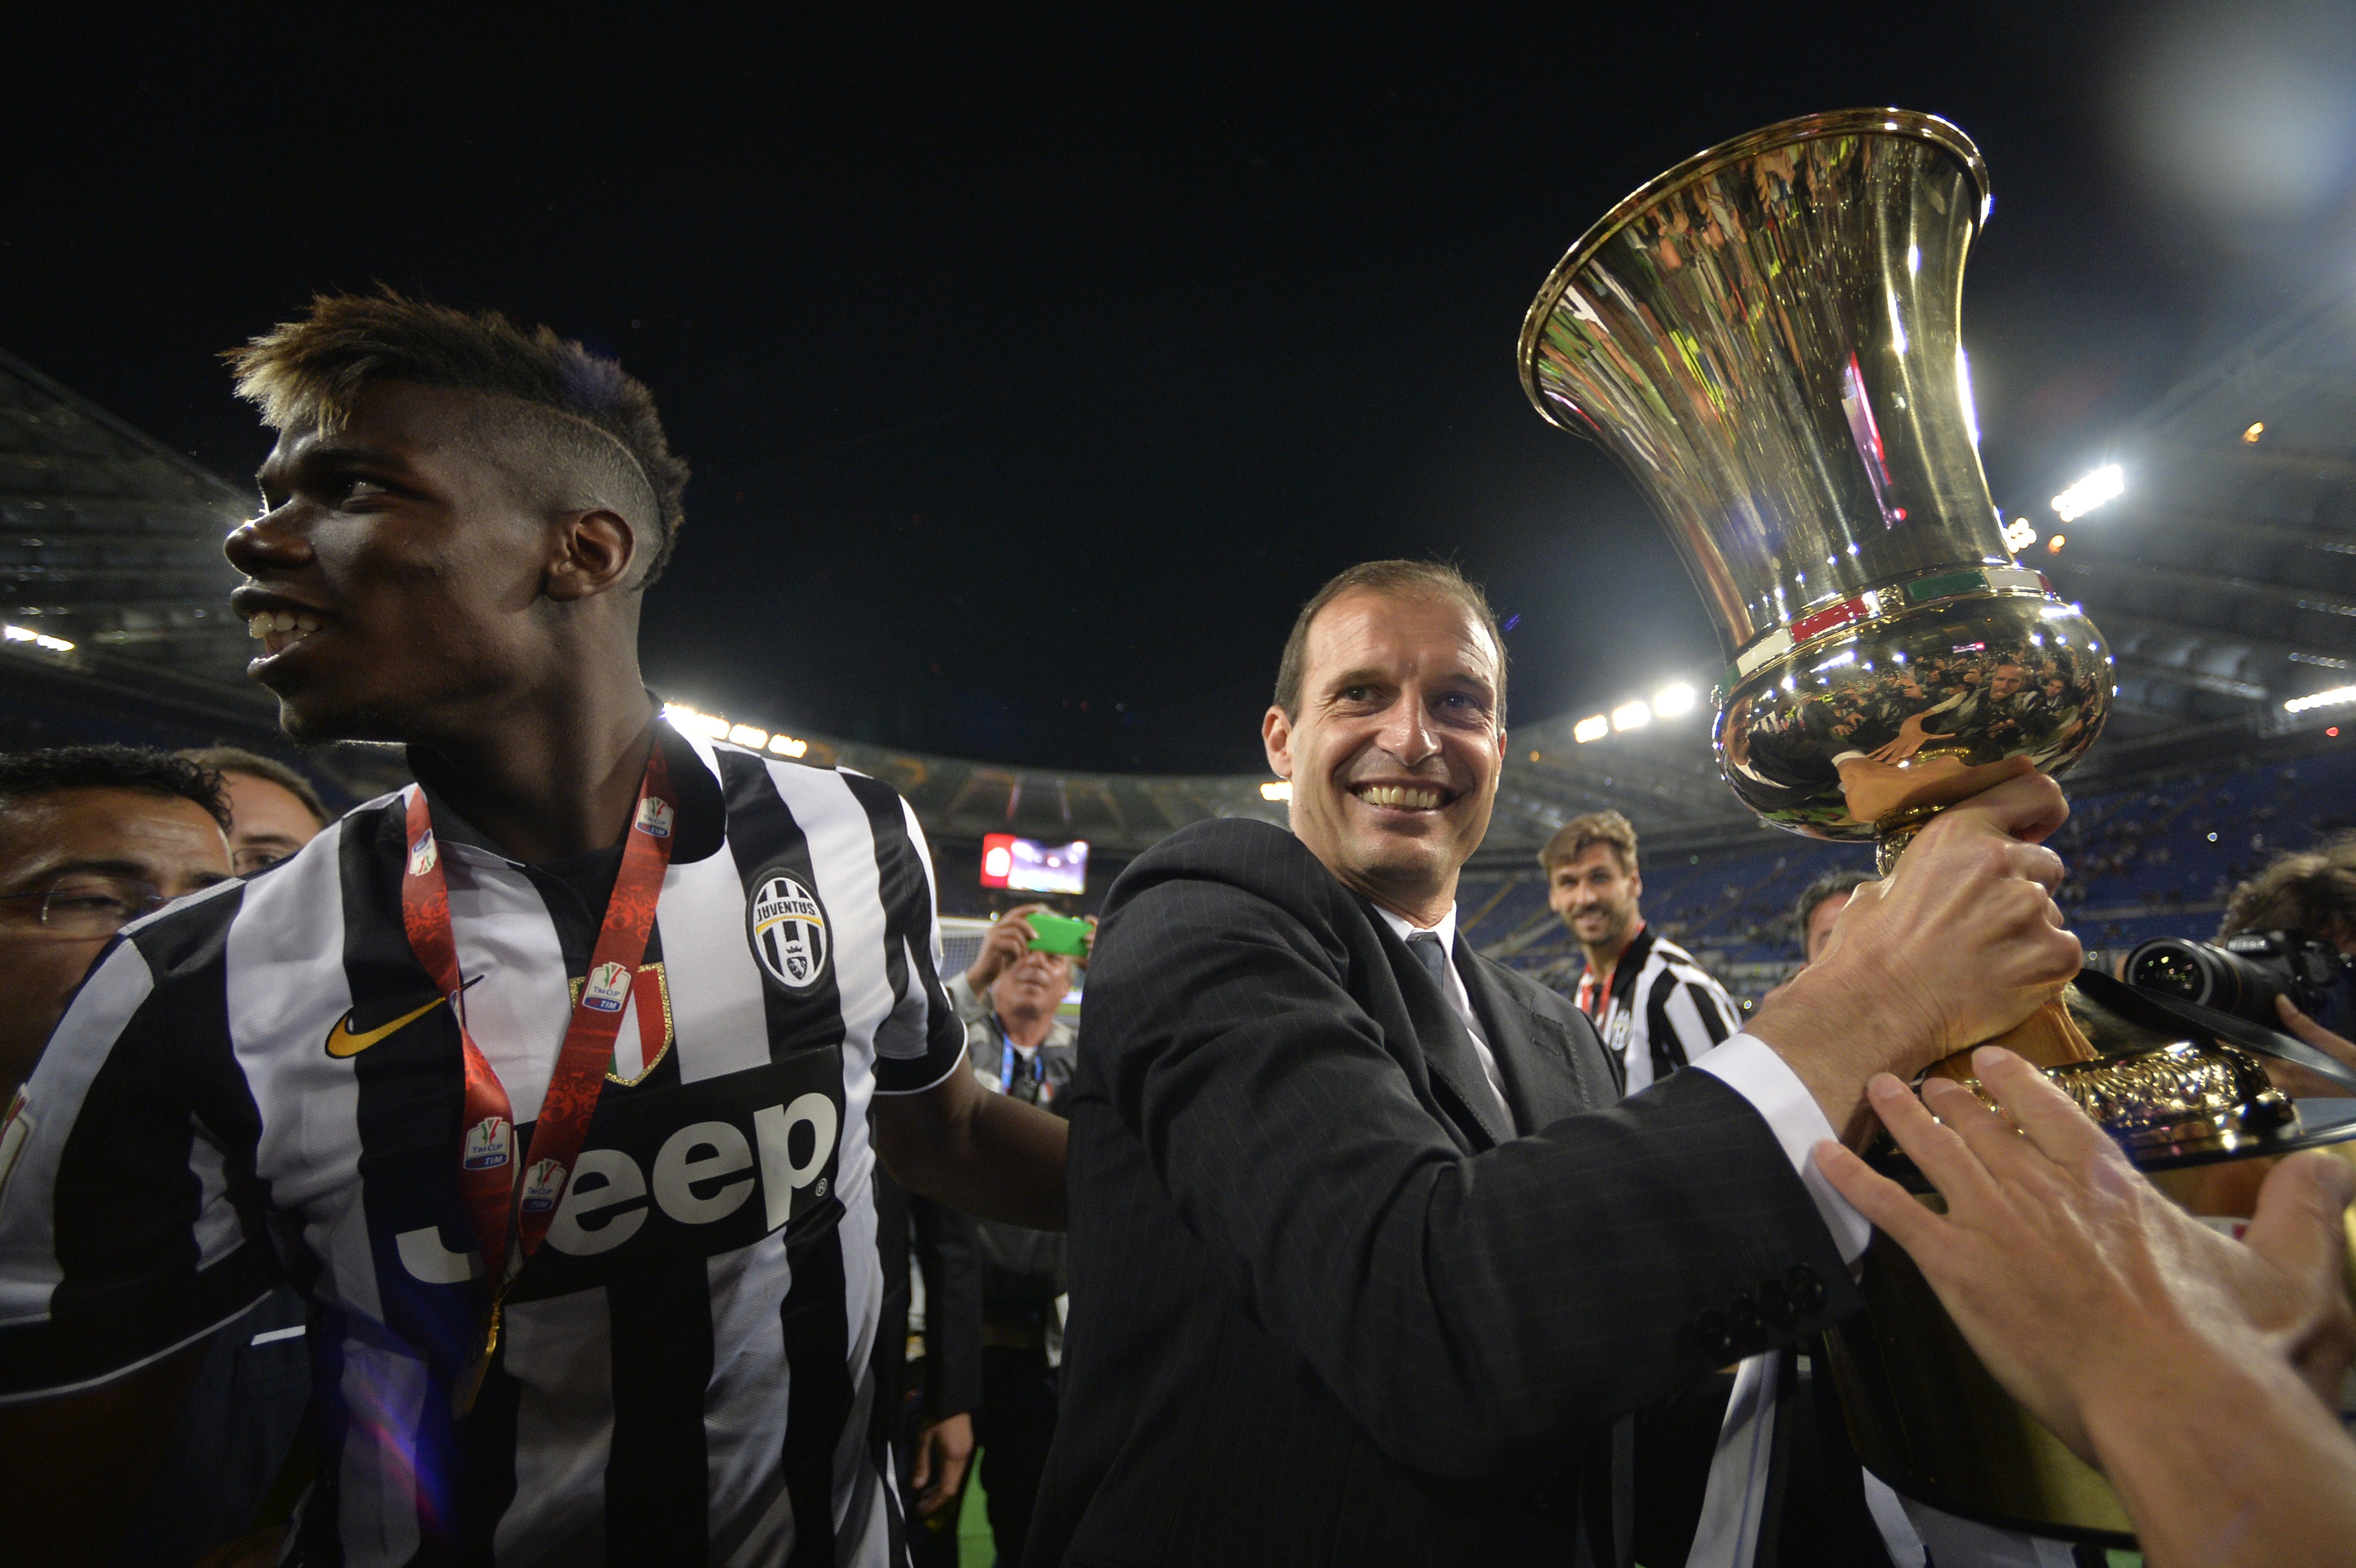 Juventus' coach Massimiliano Allegri (R) and Juventus' midfielder from France Paul Pogba celebrate with the trophy after winning 2-1 the Italian Tim Cup final match (Coppa Italia) between Juventus and Lazio on May 20, 2015 at the Stadio Olimpico in Rome.       AFP PHOTO / ANDREAS SOLARO        (Photo credit should read ANDREAS SOLARO/AFP/Getty Images)